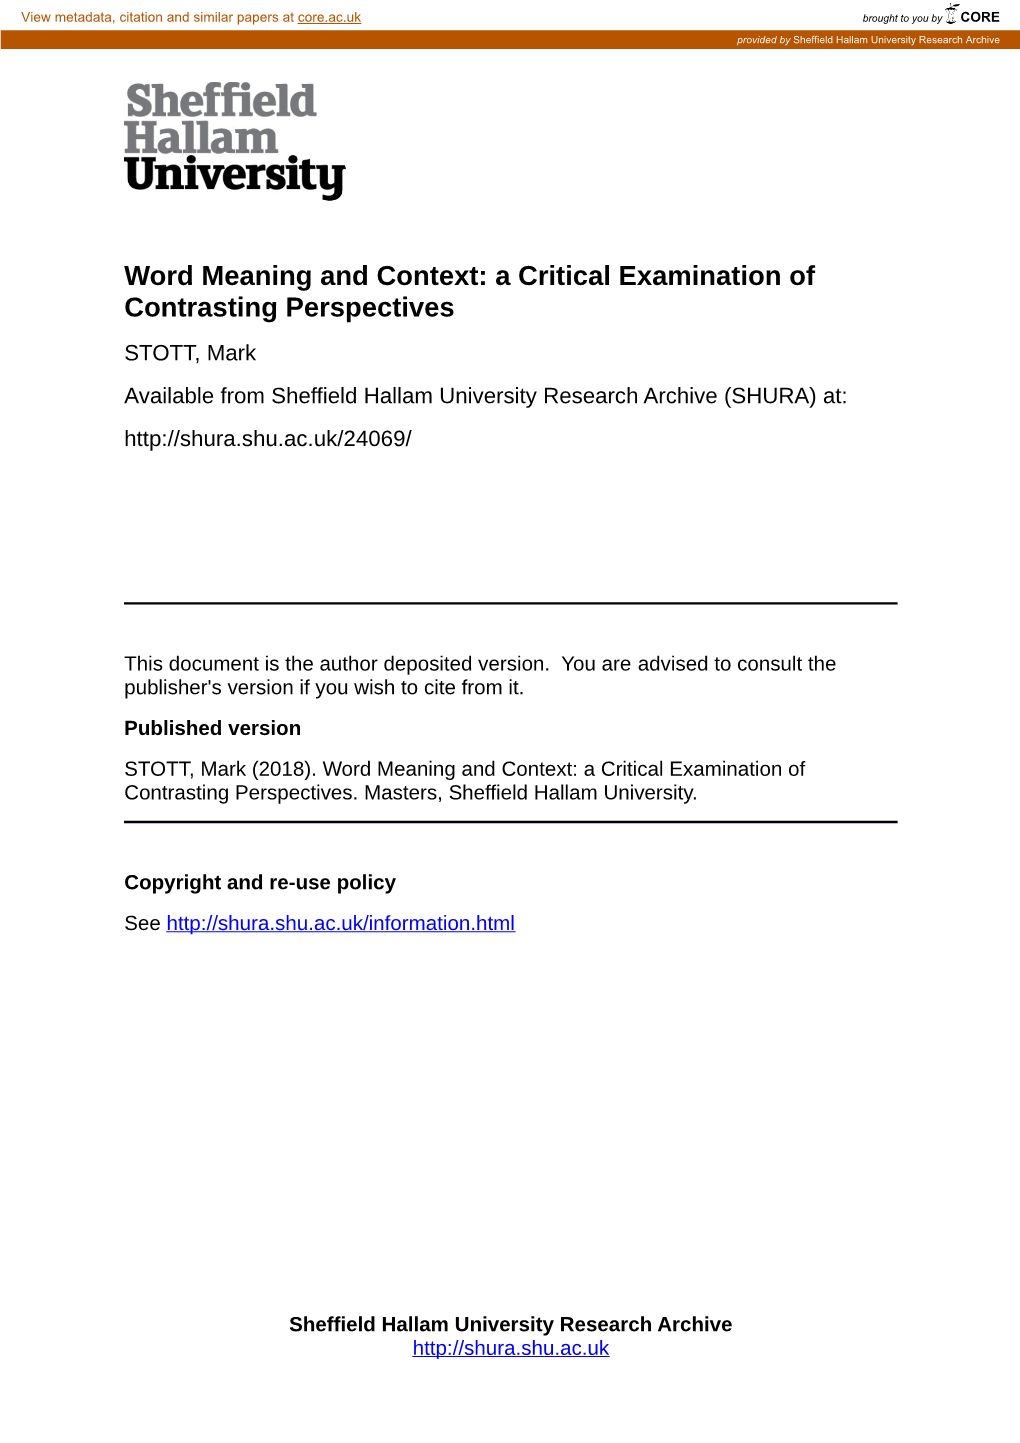 Word Meaning and Context: a Critical Examination of Contrasting